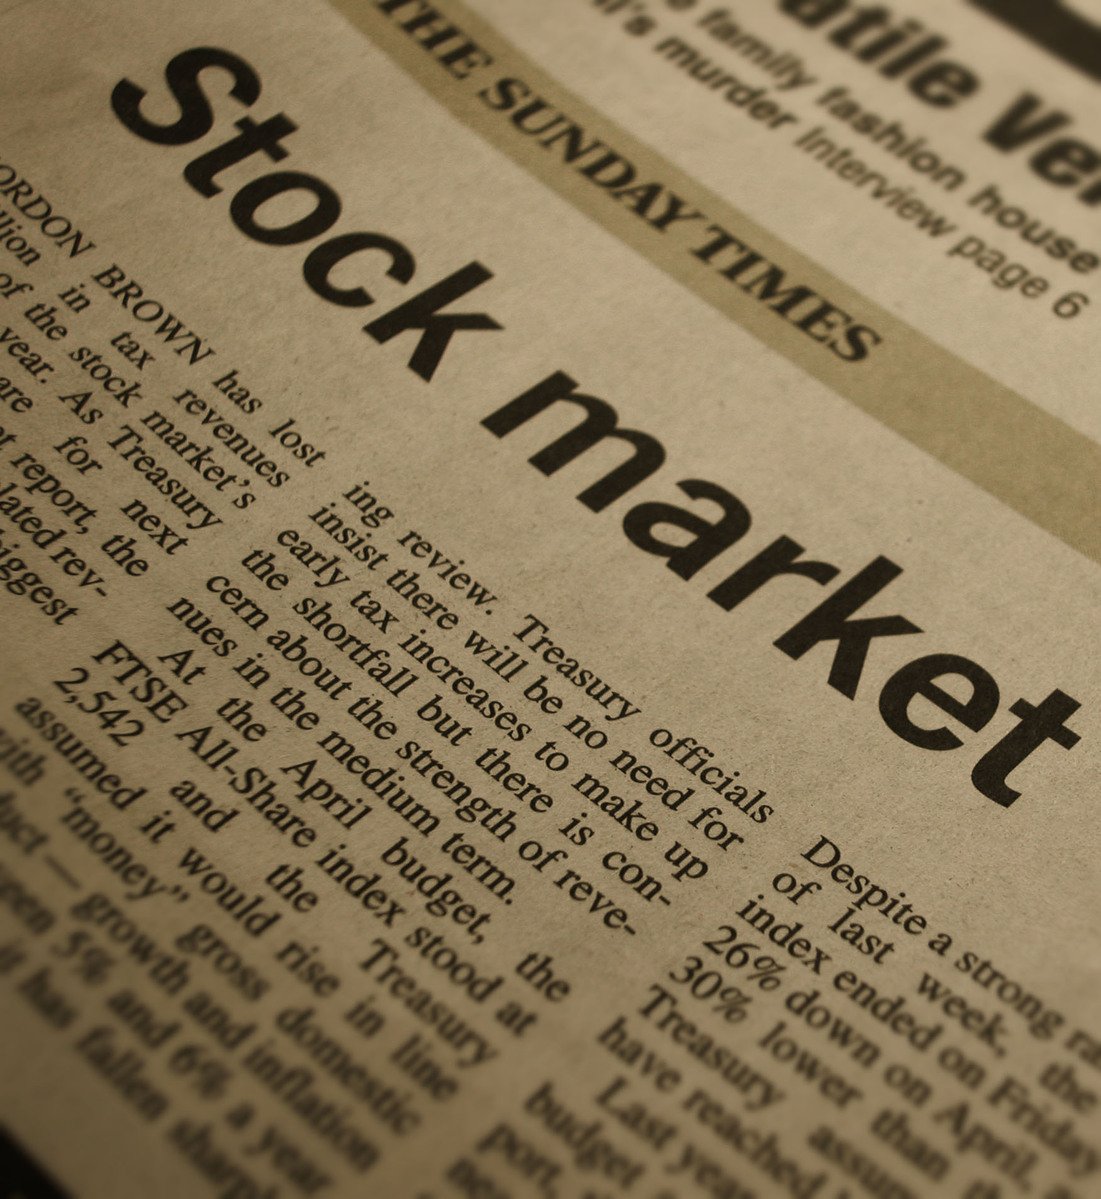 a newspaper page showing a stock market text message